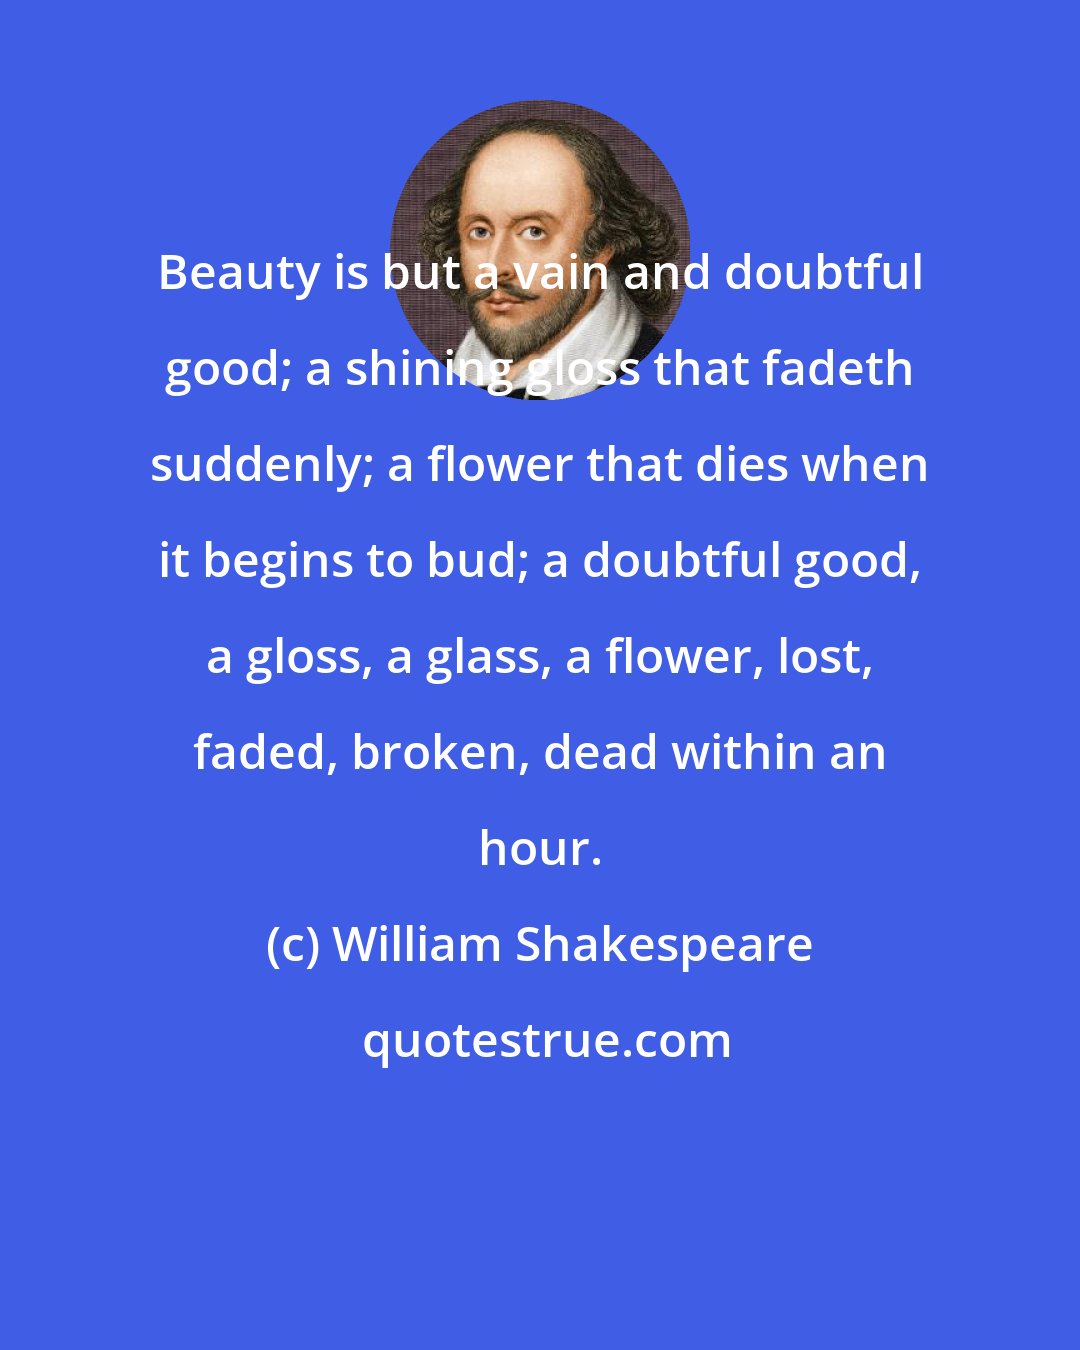 William Shakespeare: Beauty is but a vain and doubtful good; a shining gloss that fadeth suddenly; a flower that dies when it begins to bud; a doubtful good, a gloss, a glass, a flower, lost, faded, broken, dead within an hour.